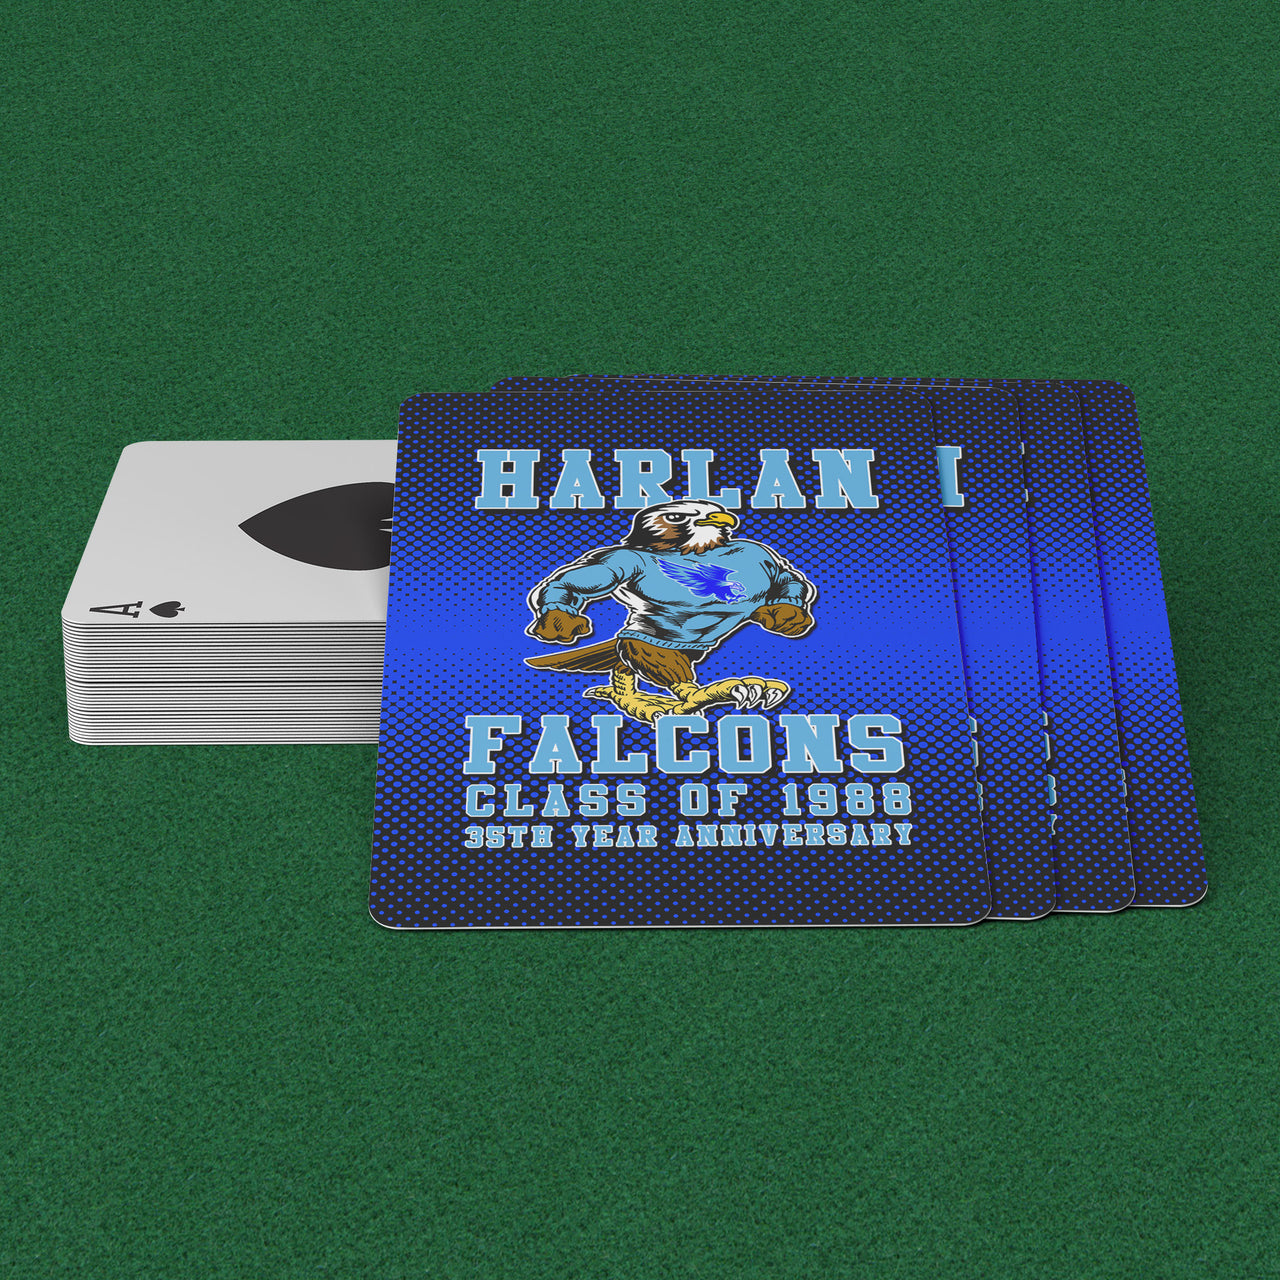 Harlan HS Falcons Playing Cards